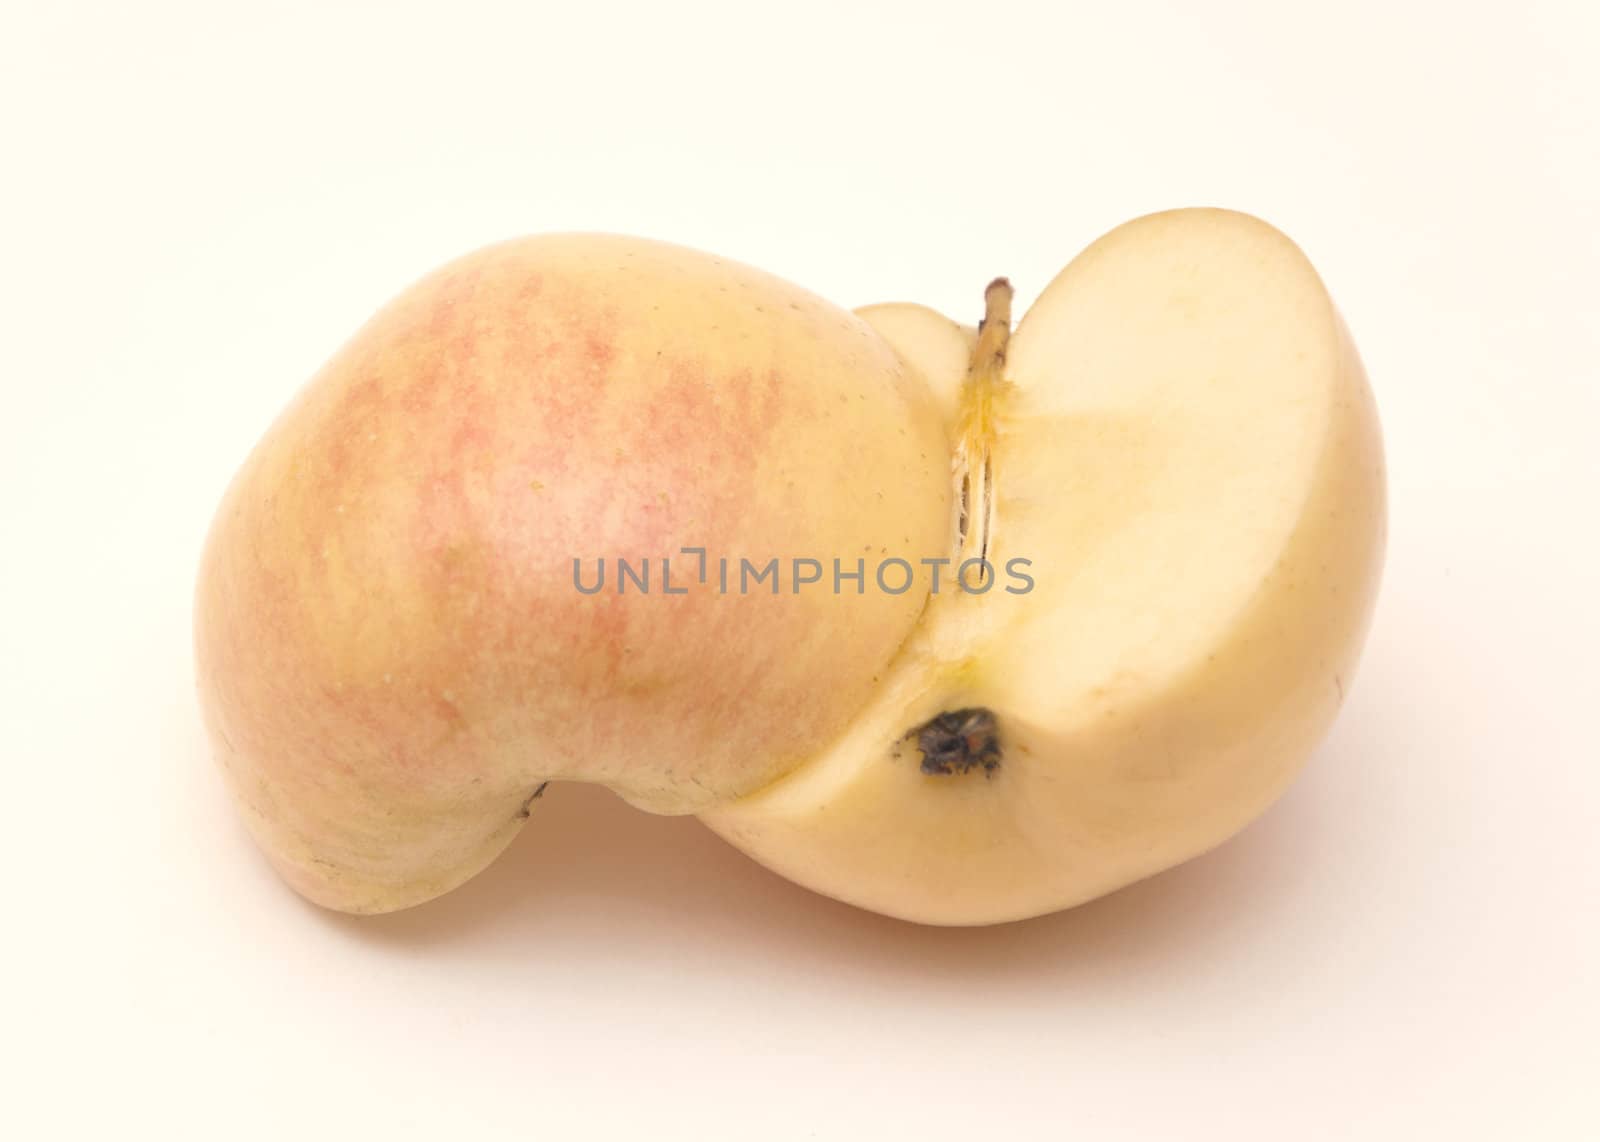 Two halves of juicy ripe apple on white background